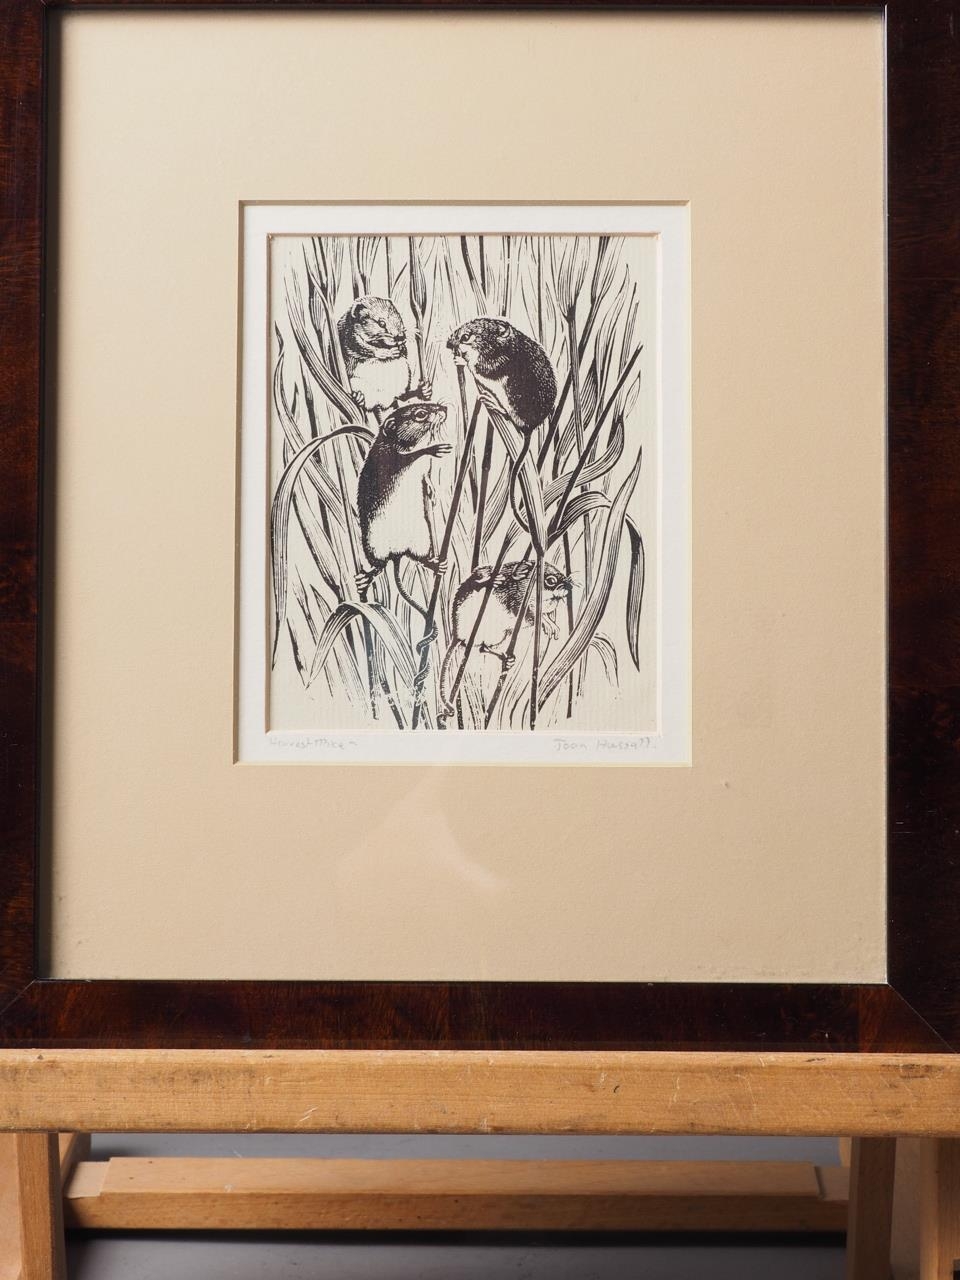 Joan Hussell: wood engraving, "Harvest Mice", in wood effect frame, and a Kono Bairei colour print